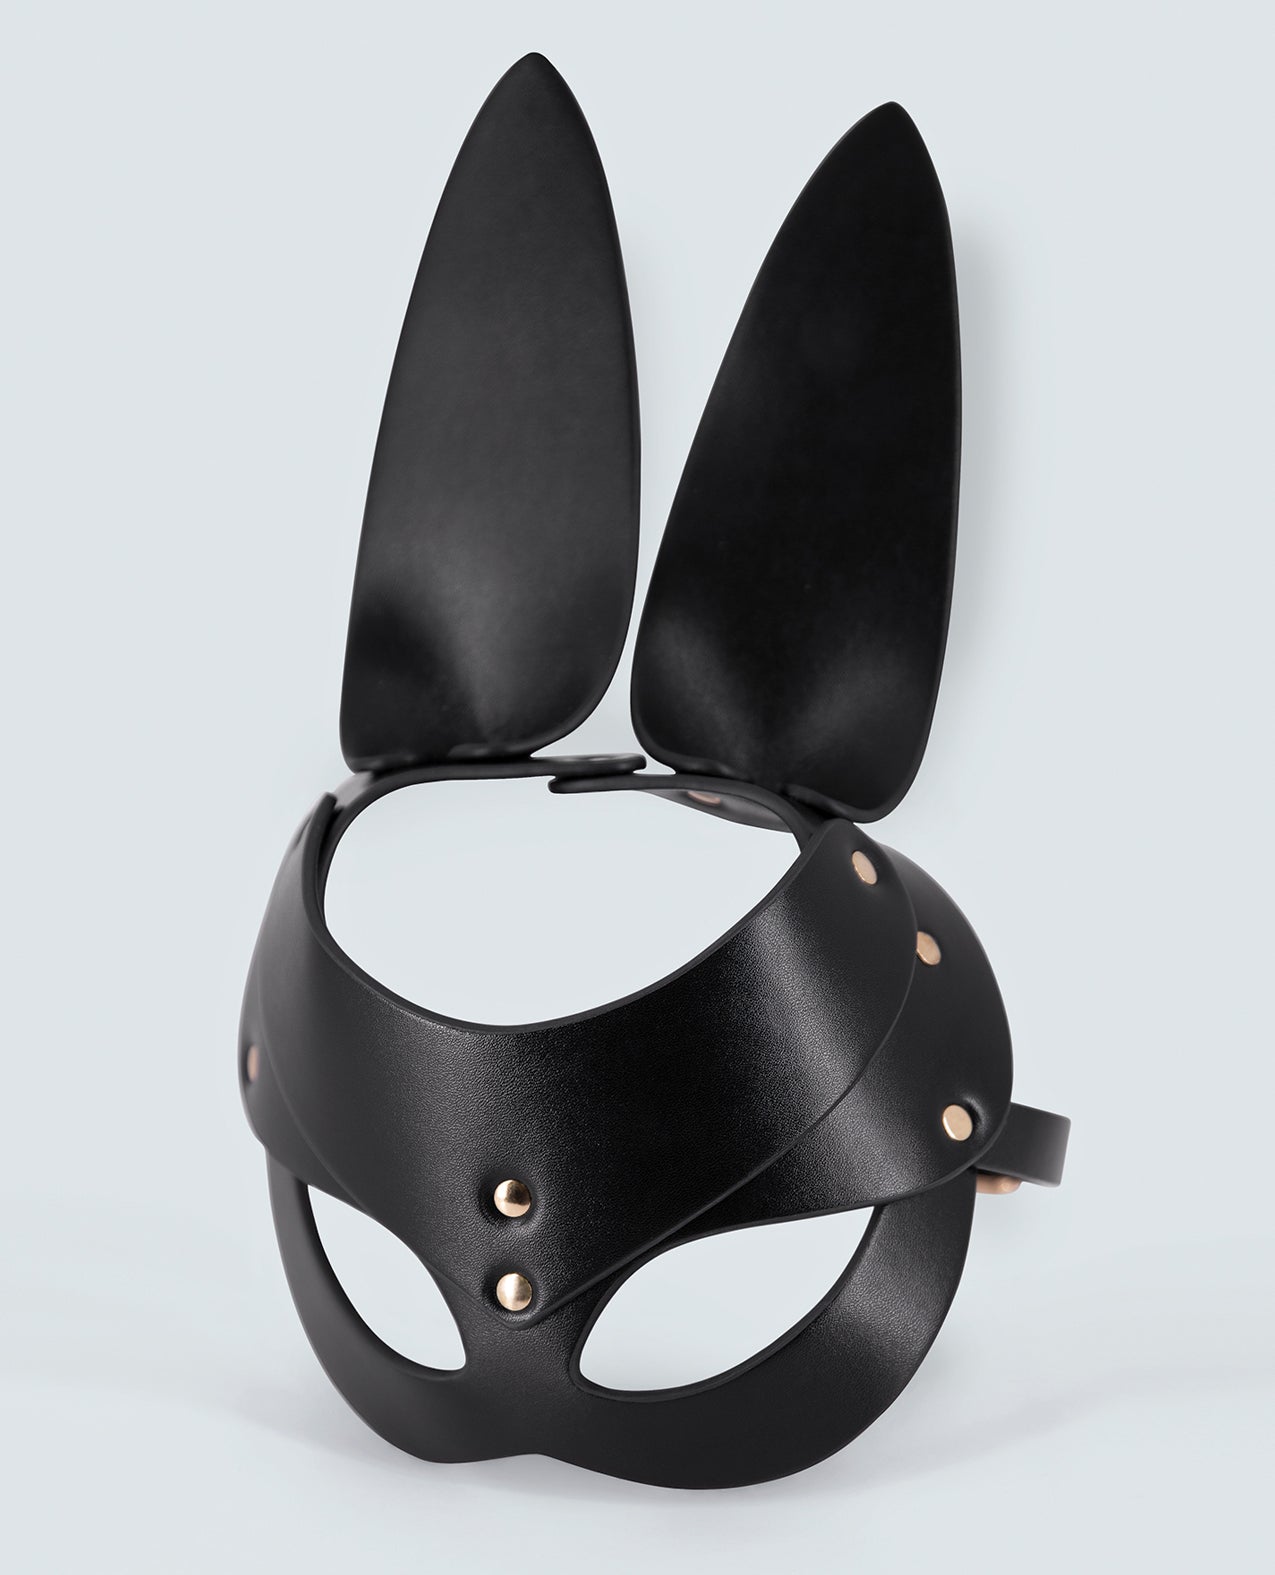 Shop for the Lust PU Leather Bunny Mask - Adjustable & Stylish at My Ruby Lips